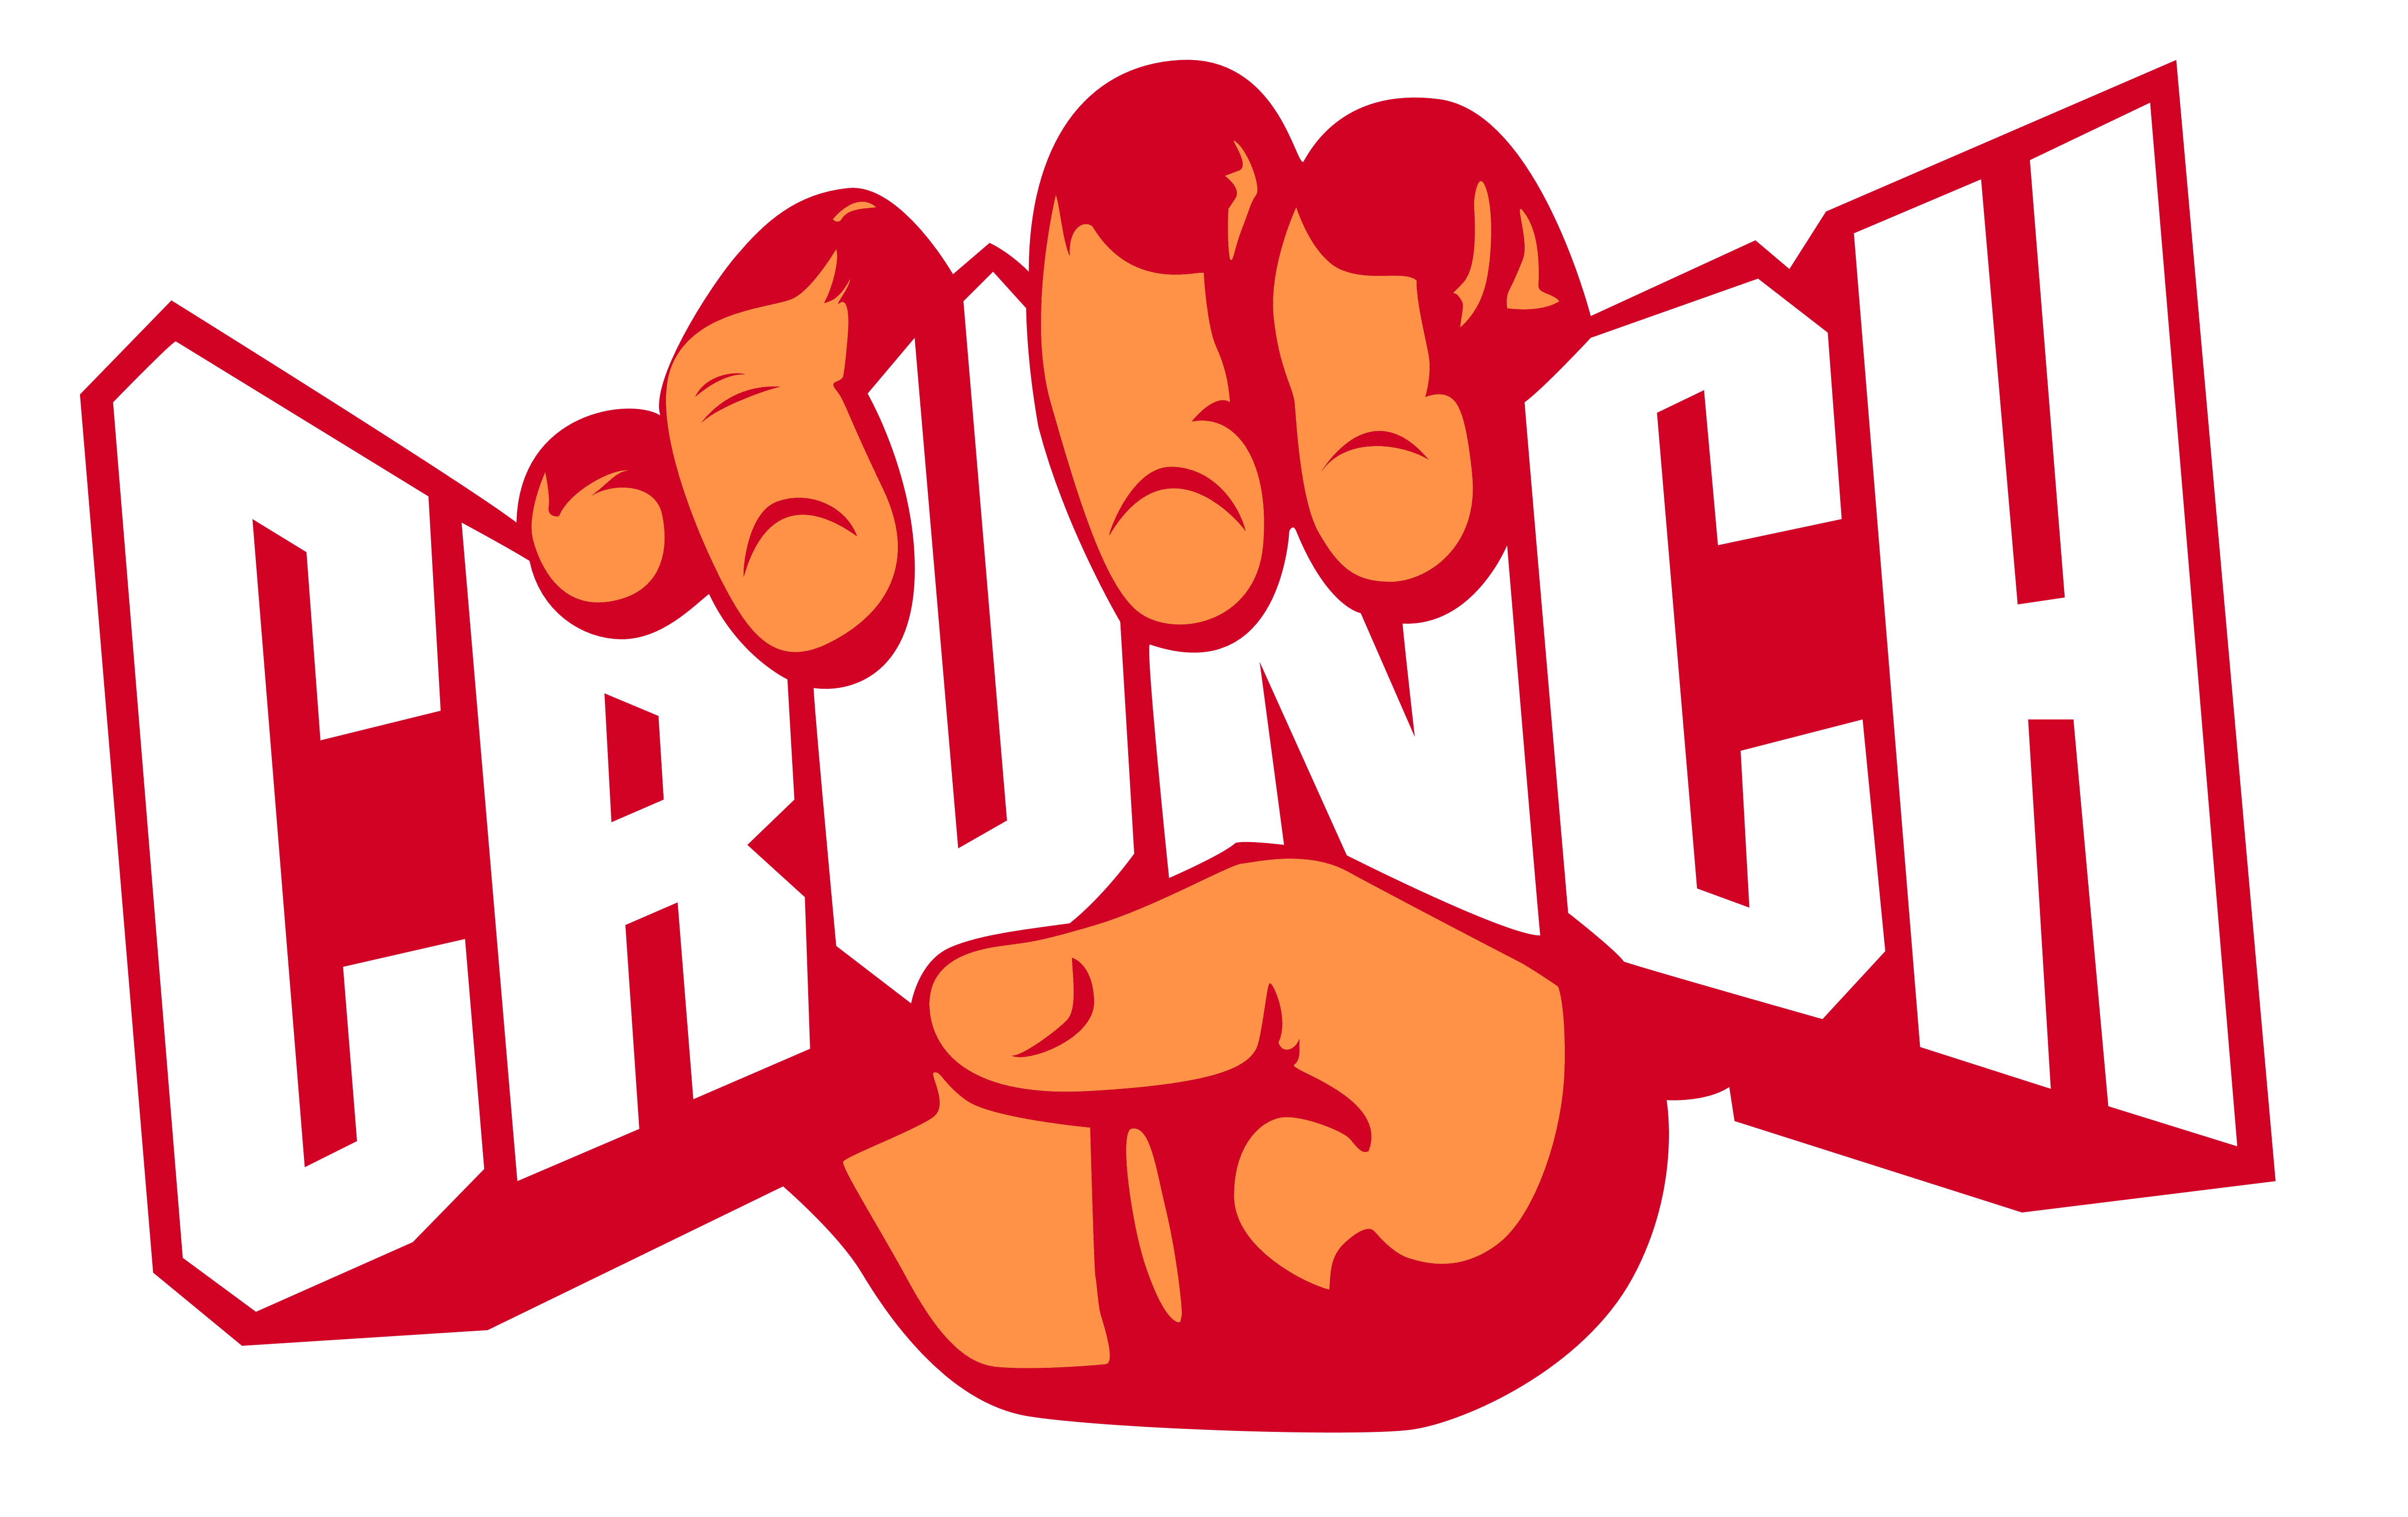 Download Crunch Gym (Fitness) - Logos Download